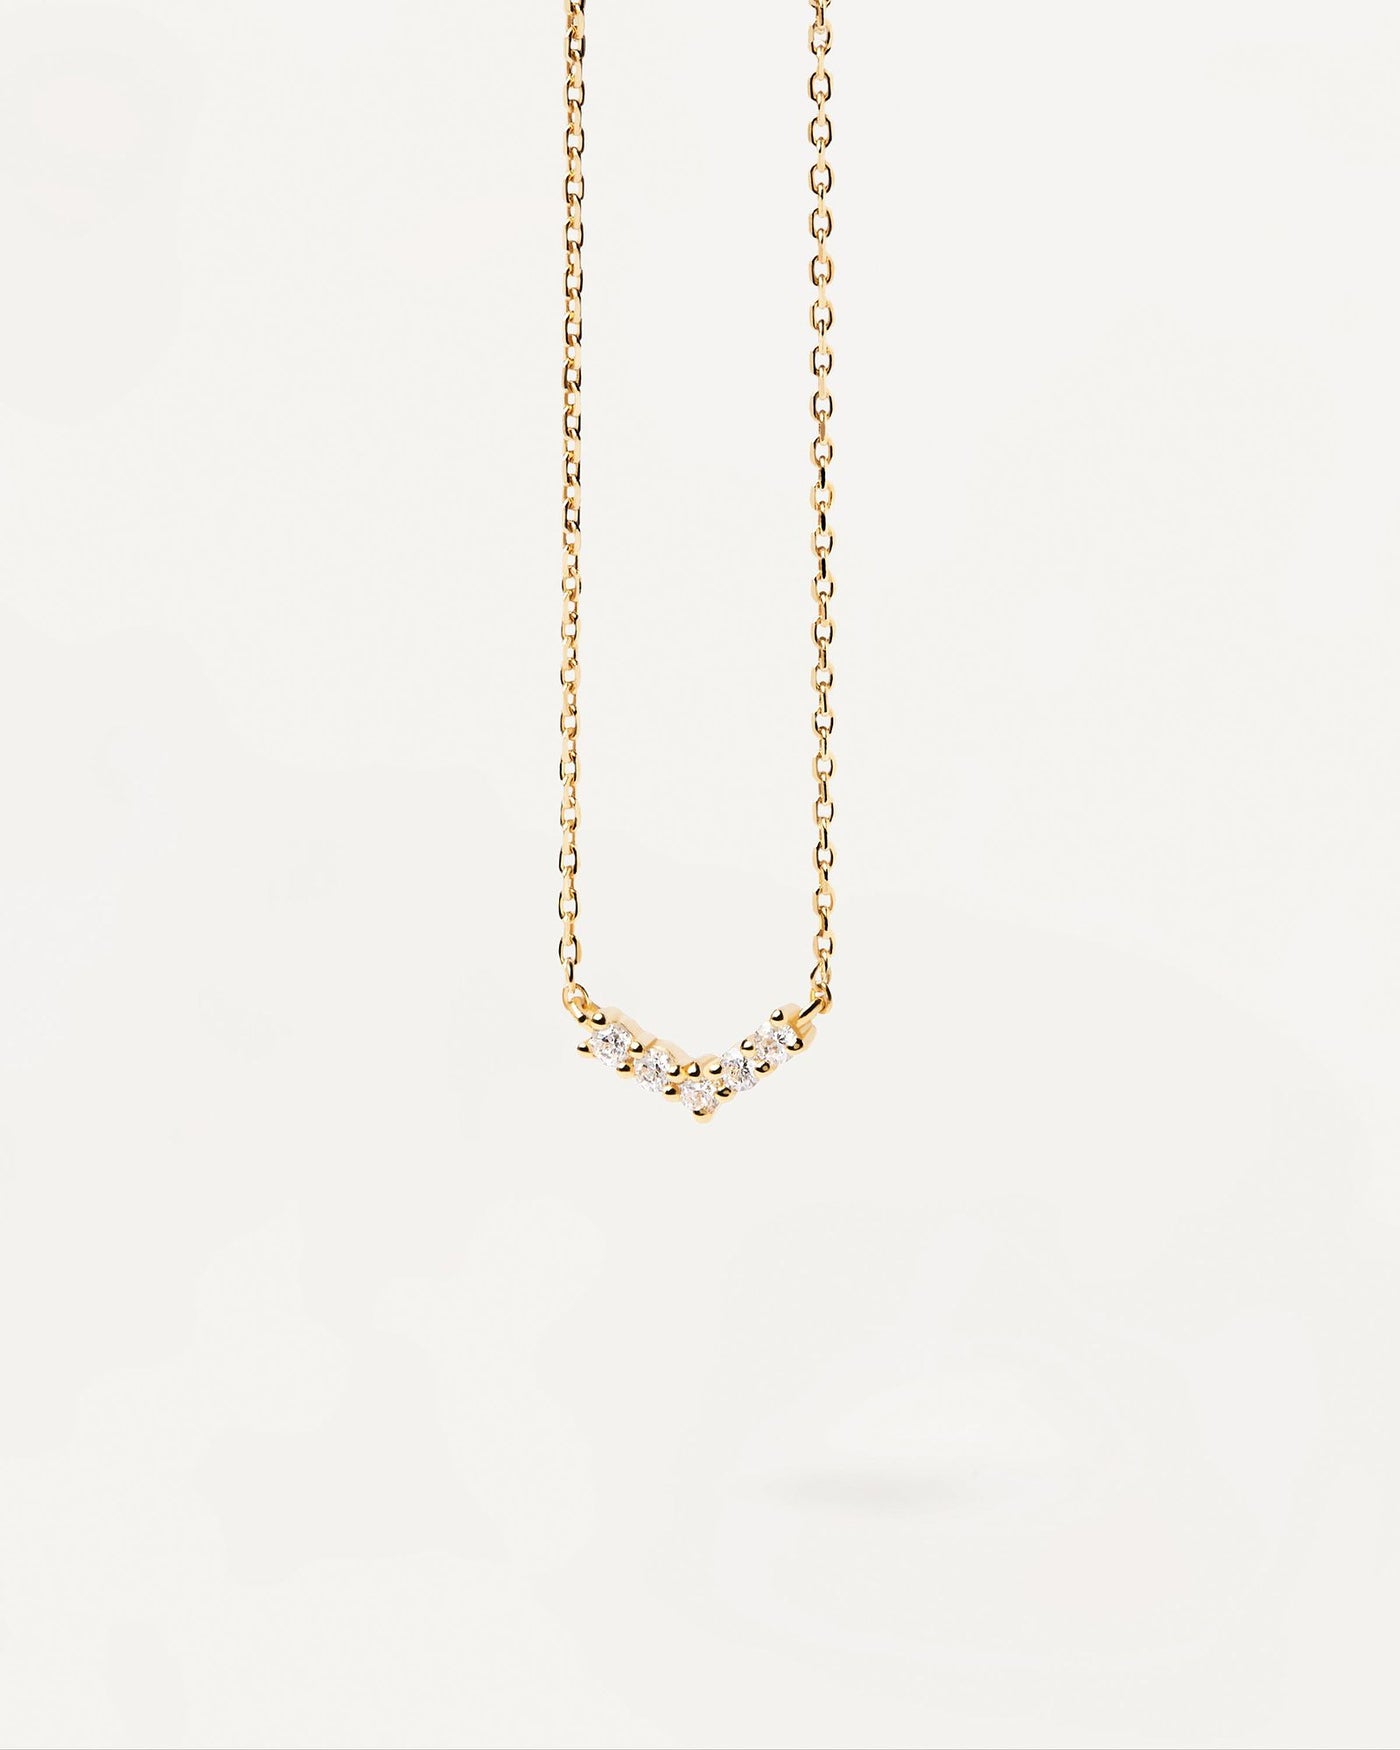 2024 Selection | Mini Crown Necklace. Gold-plated necklace with 3-zirconia pendant in triangle shape. Get the latest arrival from PDPAOLA. Place your order safely and get this Best Seller. Free Shipping.